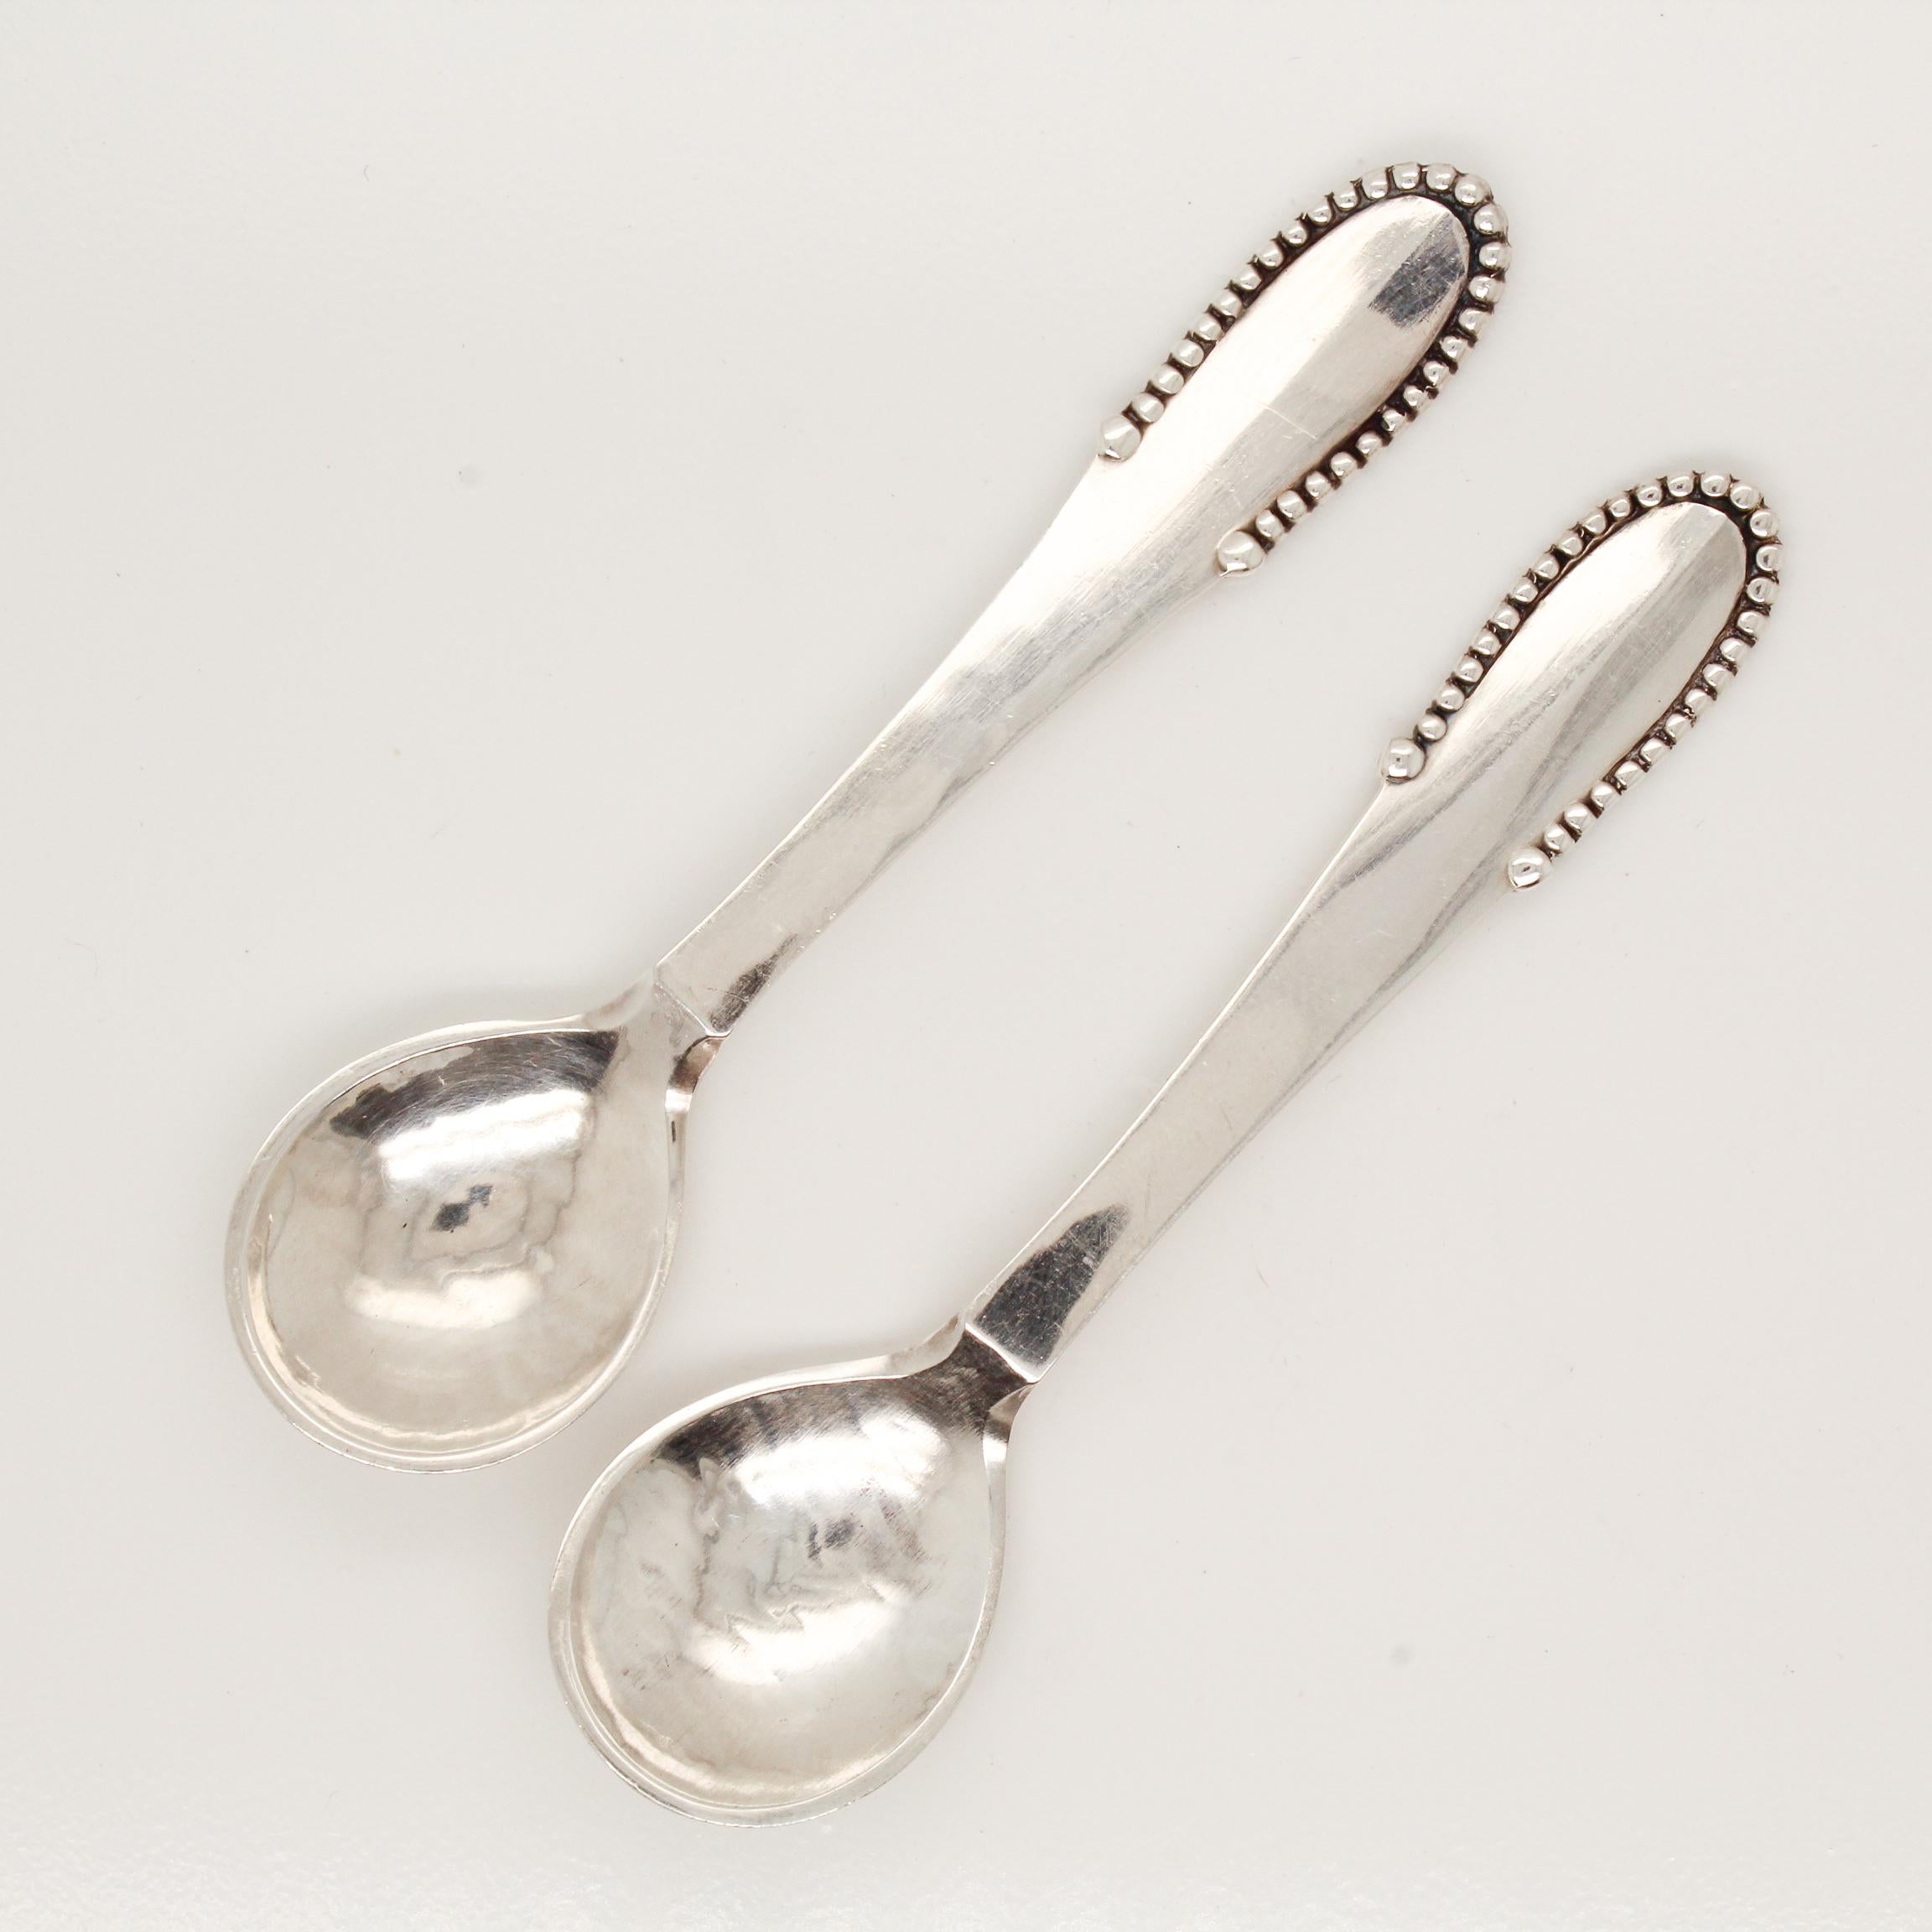 A pair of fine Georg Jensen sterling silver salt spoons.

In the Beaded pattern.

Designed by Georg Jensen.

Simply a wonderful pair of Jensen salt spoons!

Date:
20th Century

Overall Condition:
They are in overall good, as-pictured, used estate